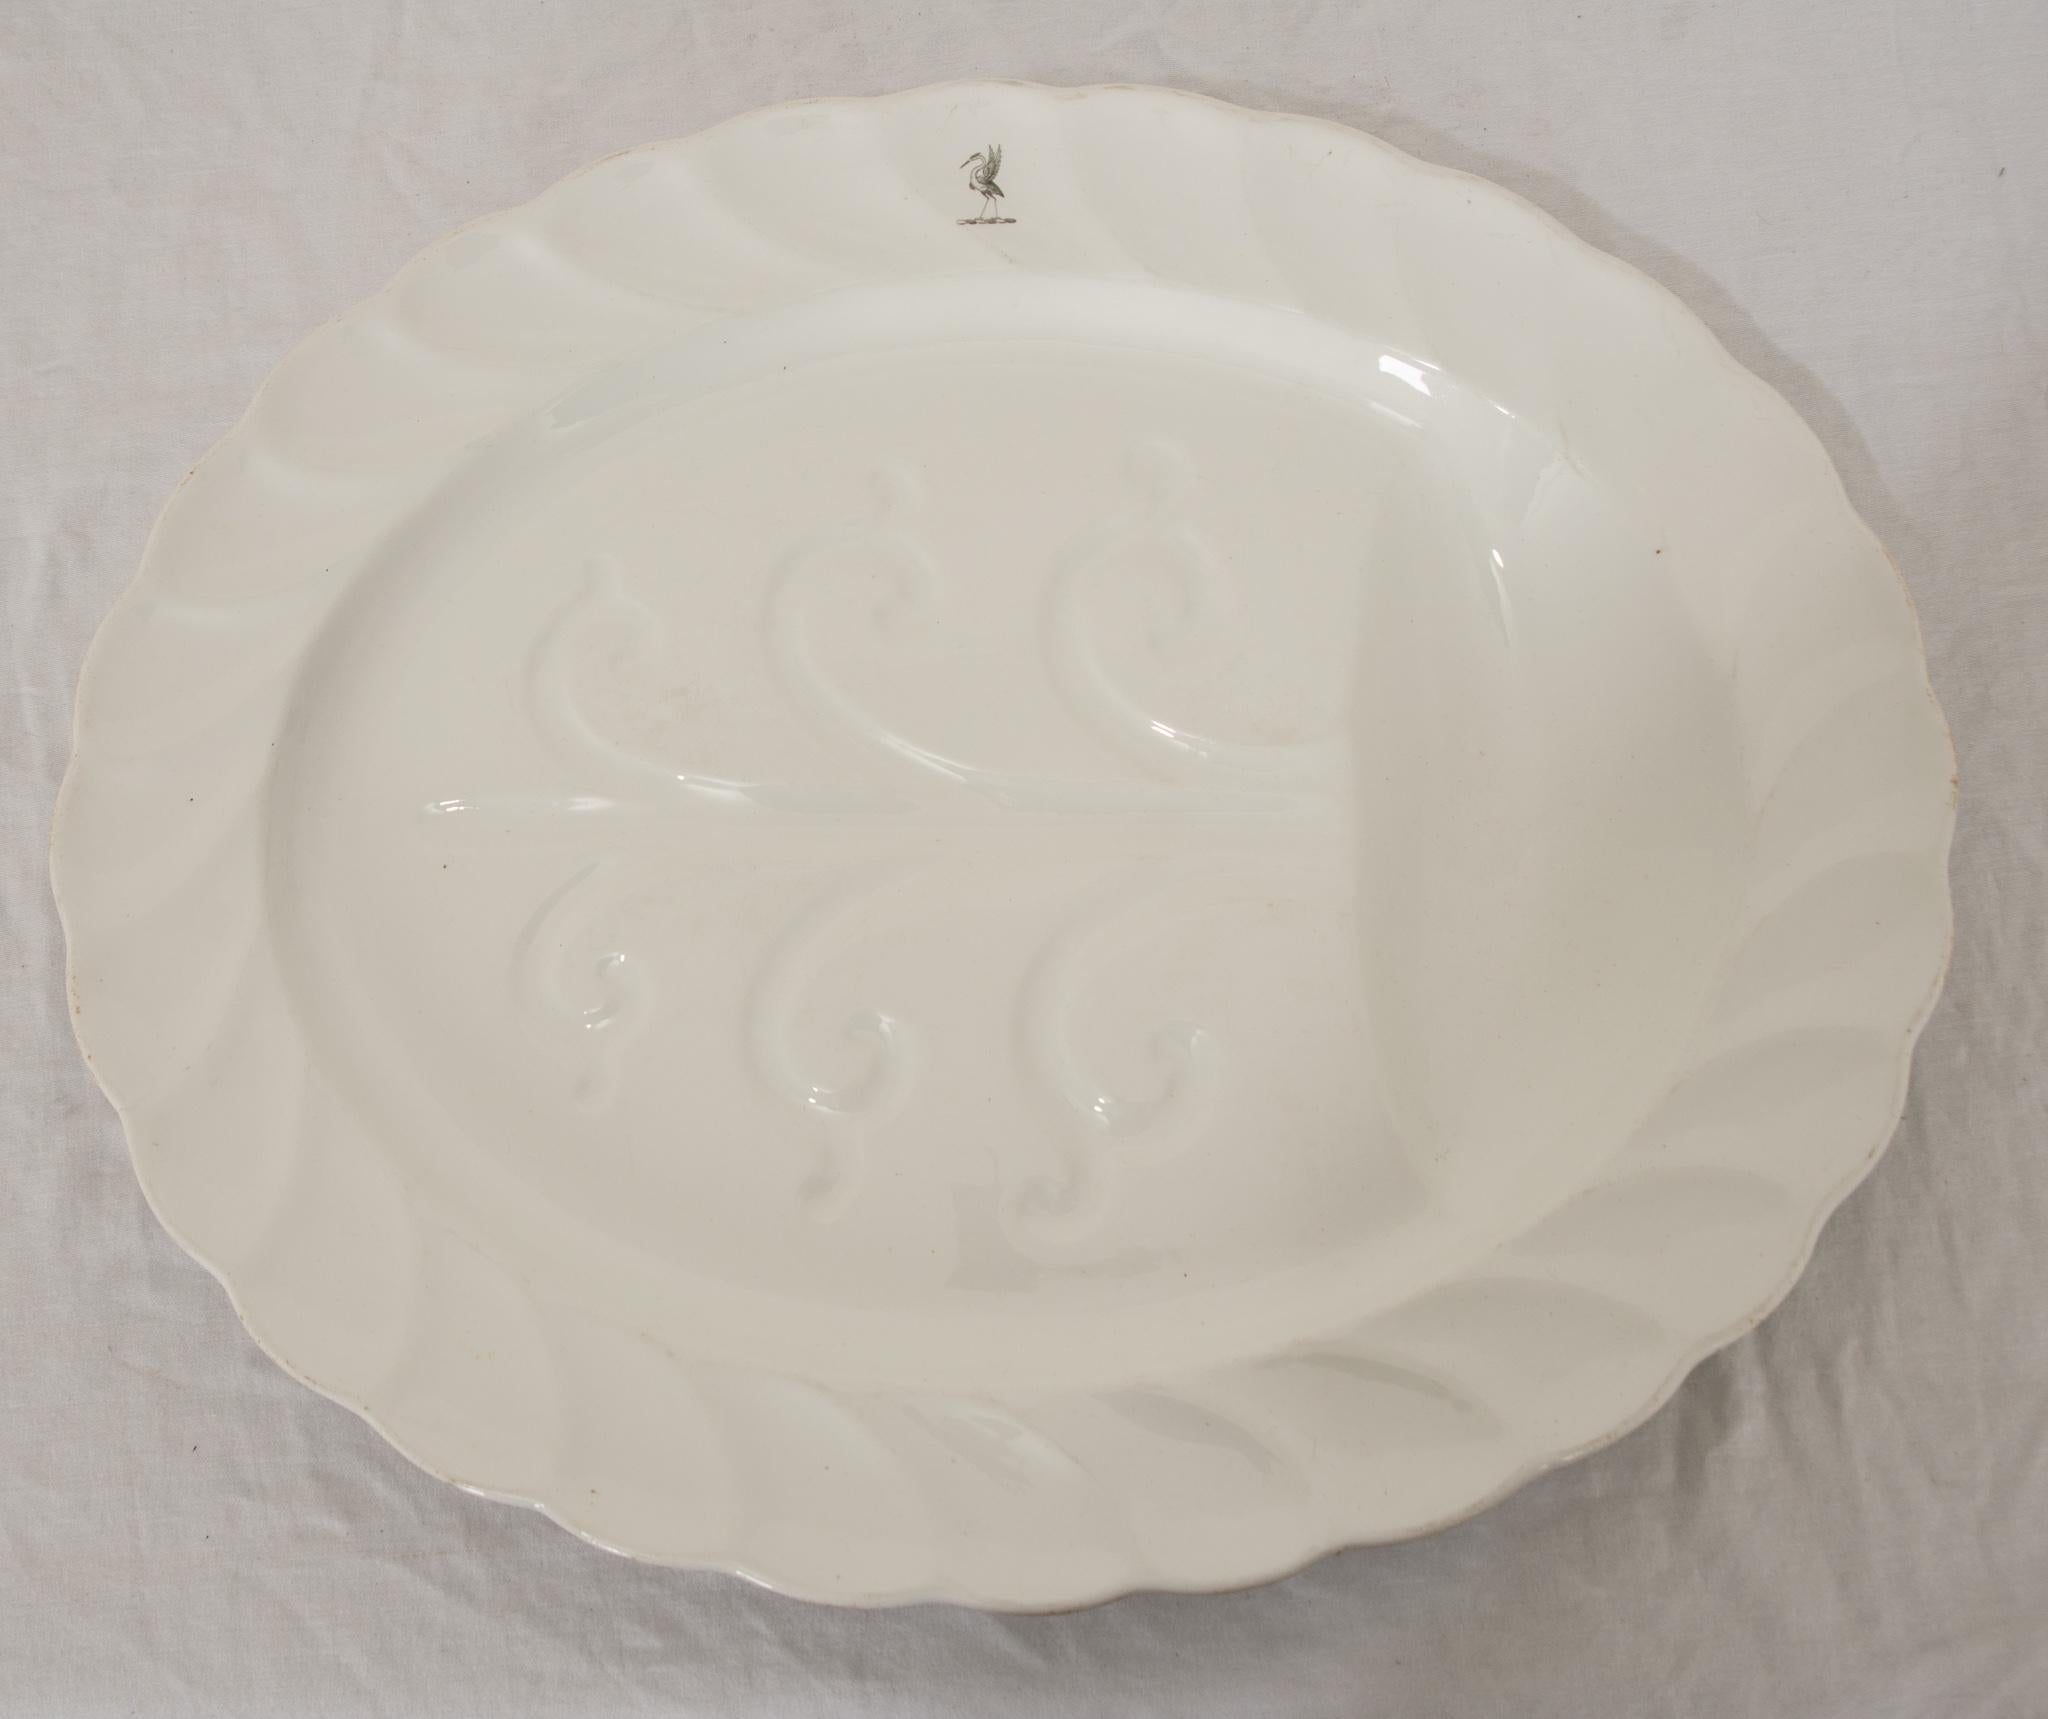 This stately 19th Century English porcelain meat platter features a scalloped rim, embossed deep draining channels, and is replete with basting well at one end.  Raised upon integral feet to base. High gloss glaze overall with a decorative crane on